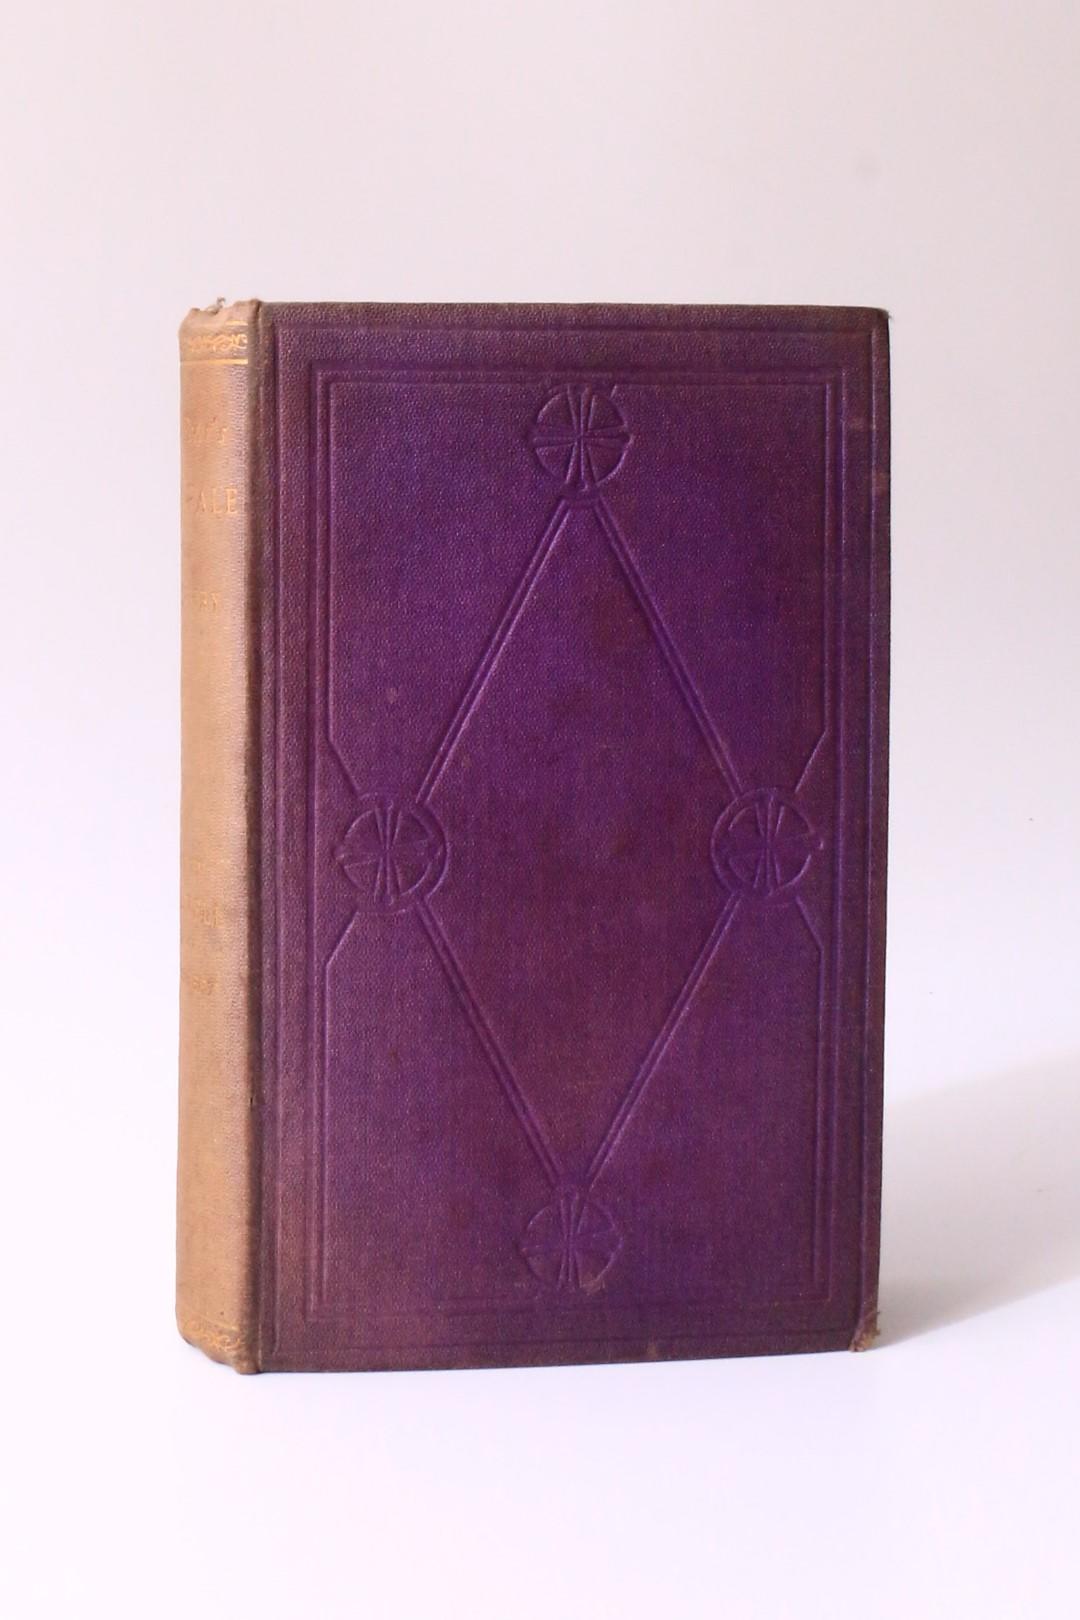 Elizabeth M. Sewell - Uncle Peter's Fairy Tale for the XIX Century - Longman's, Green & Co., 1869, First Edition.